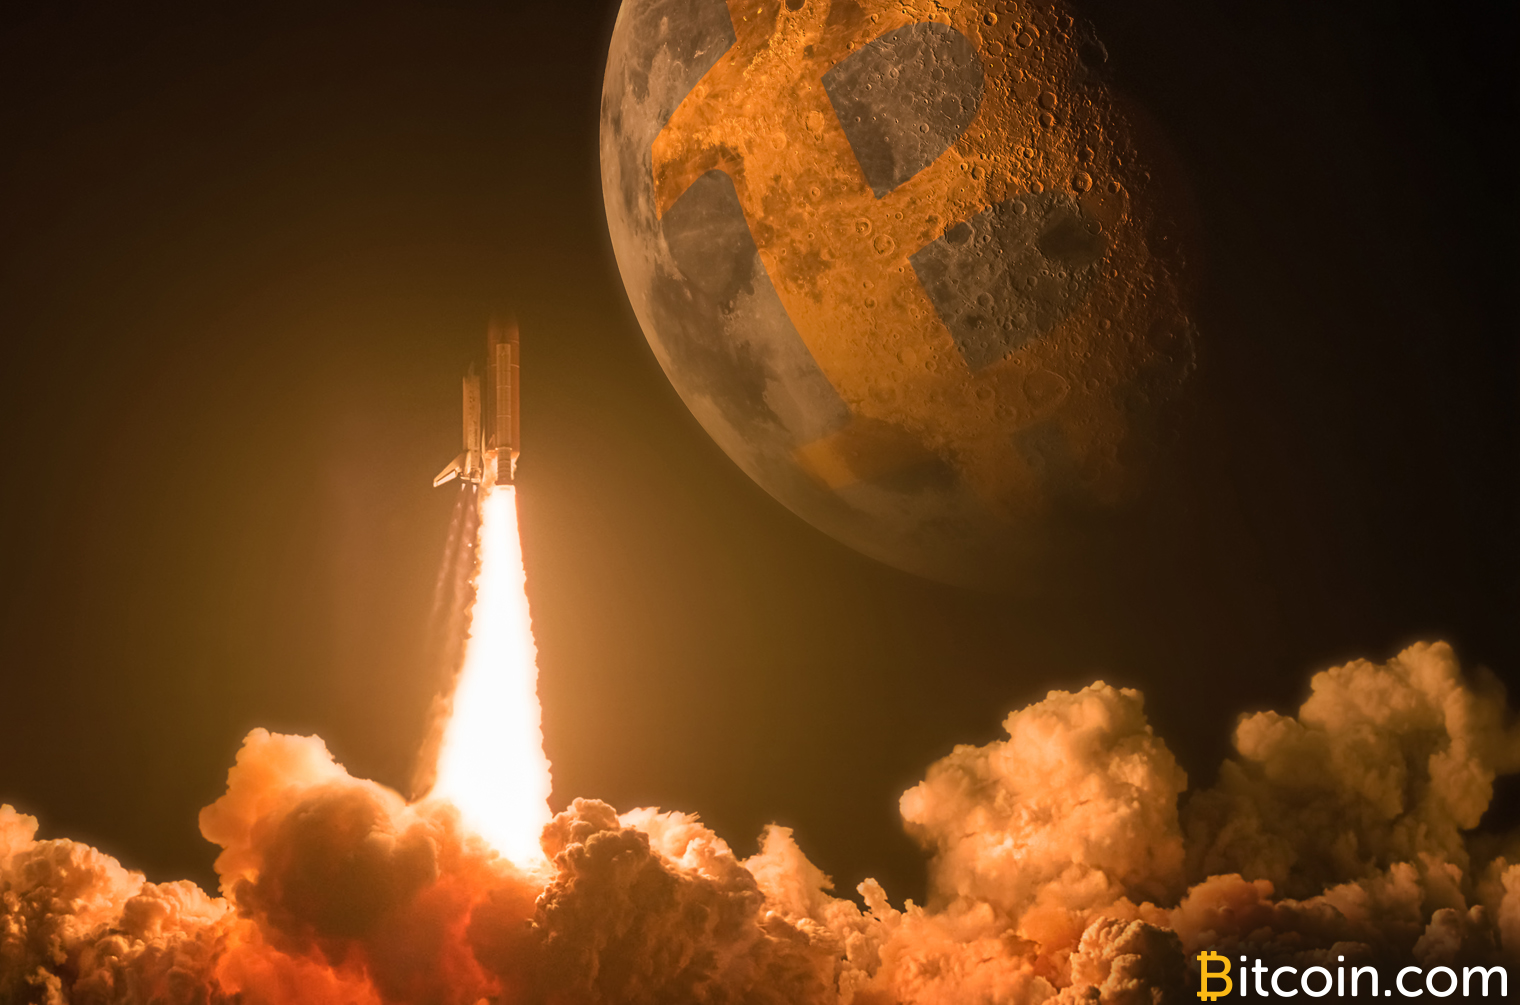 Markets Update: Bitcoin Cash Leads the Pack Again as Price Spikes 13%